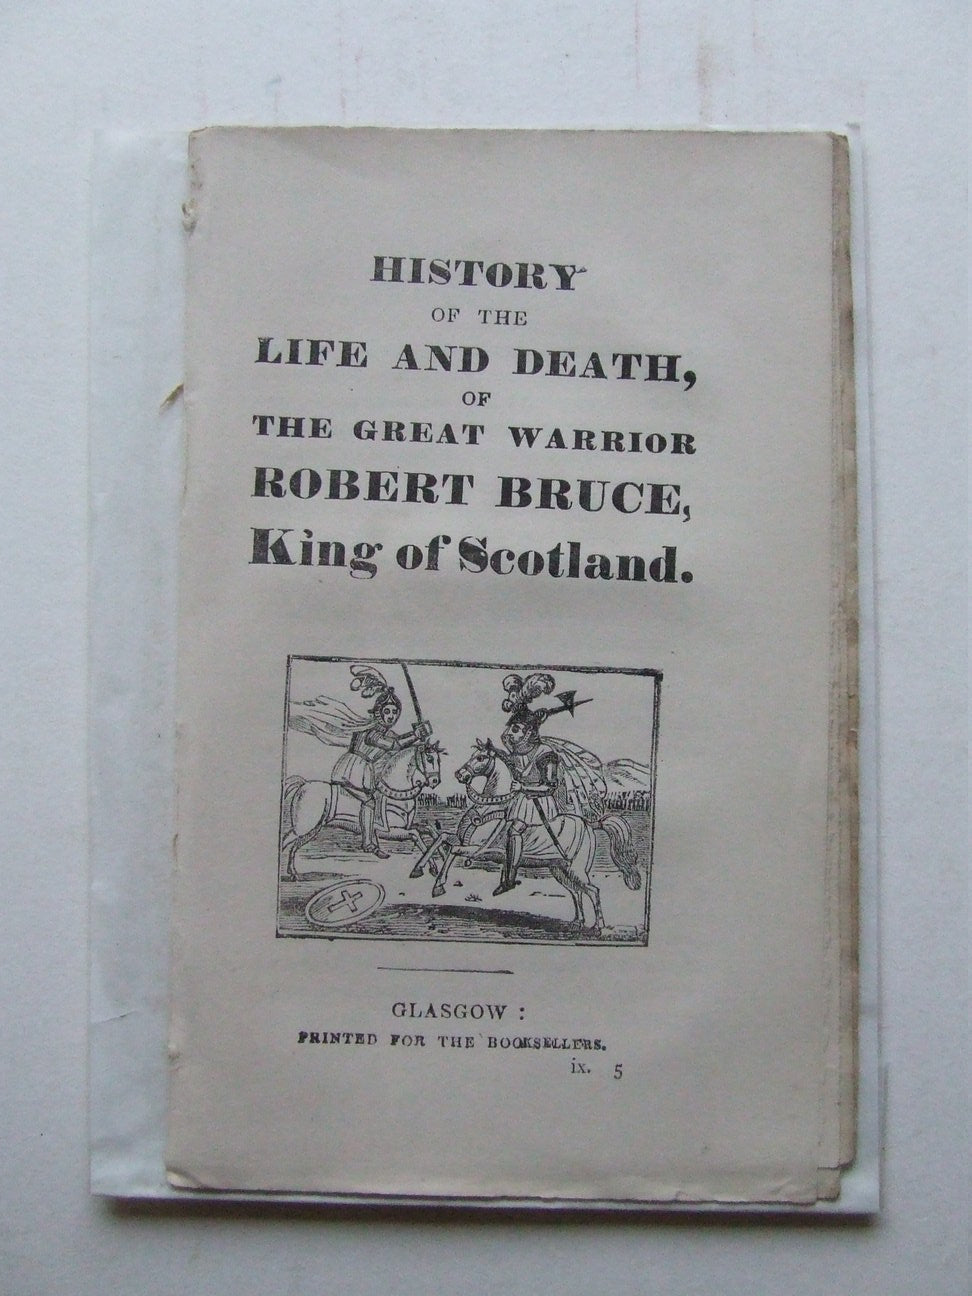 History of the Life and Death, of the great warrior Robert Bruce, King of Scotland